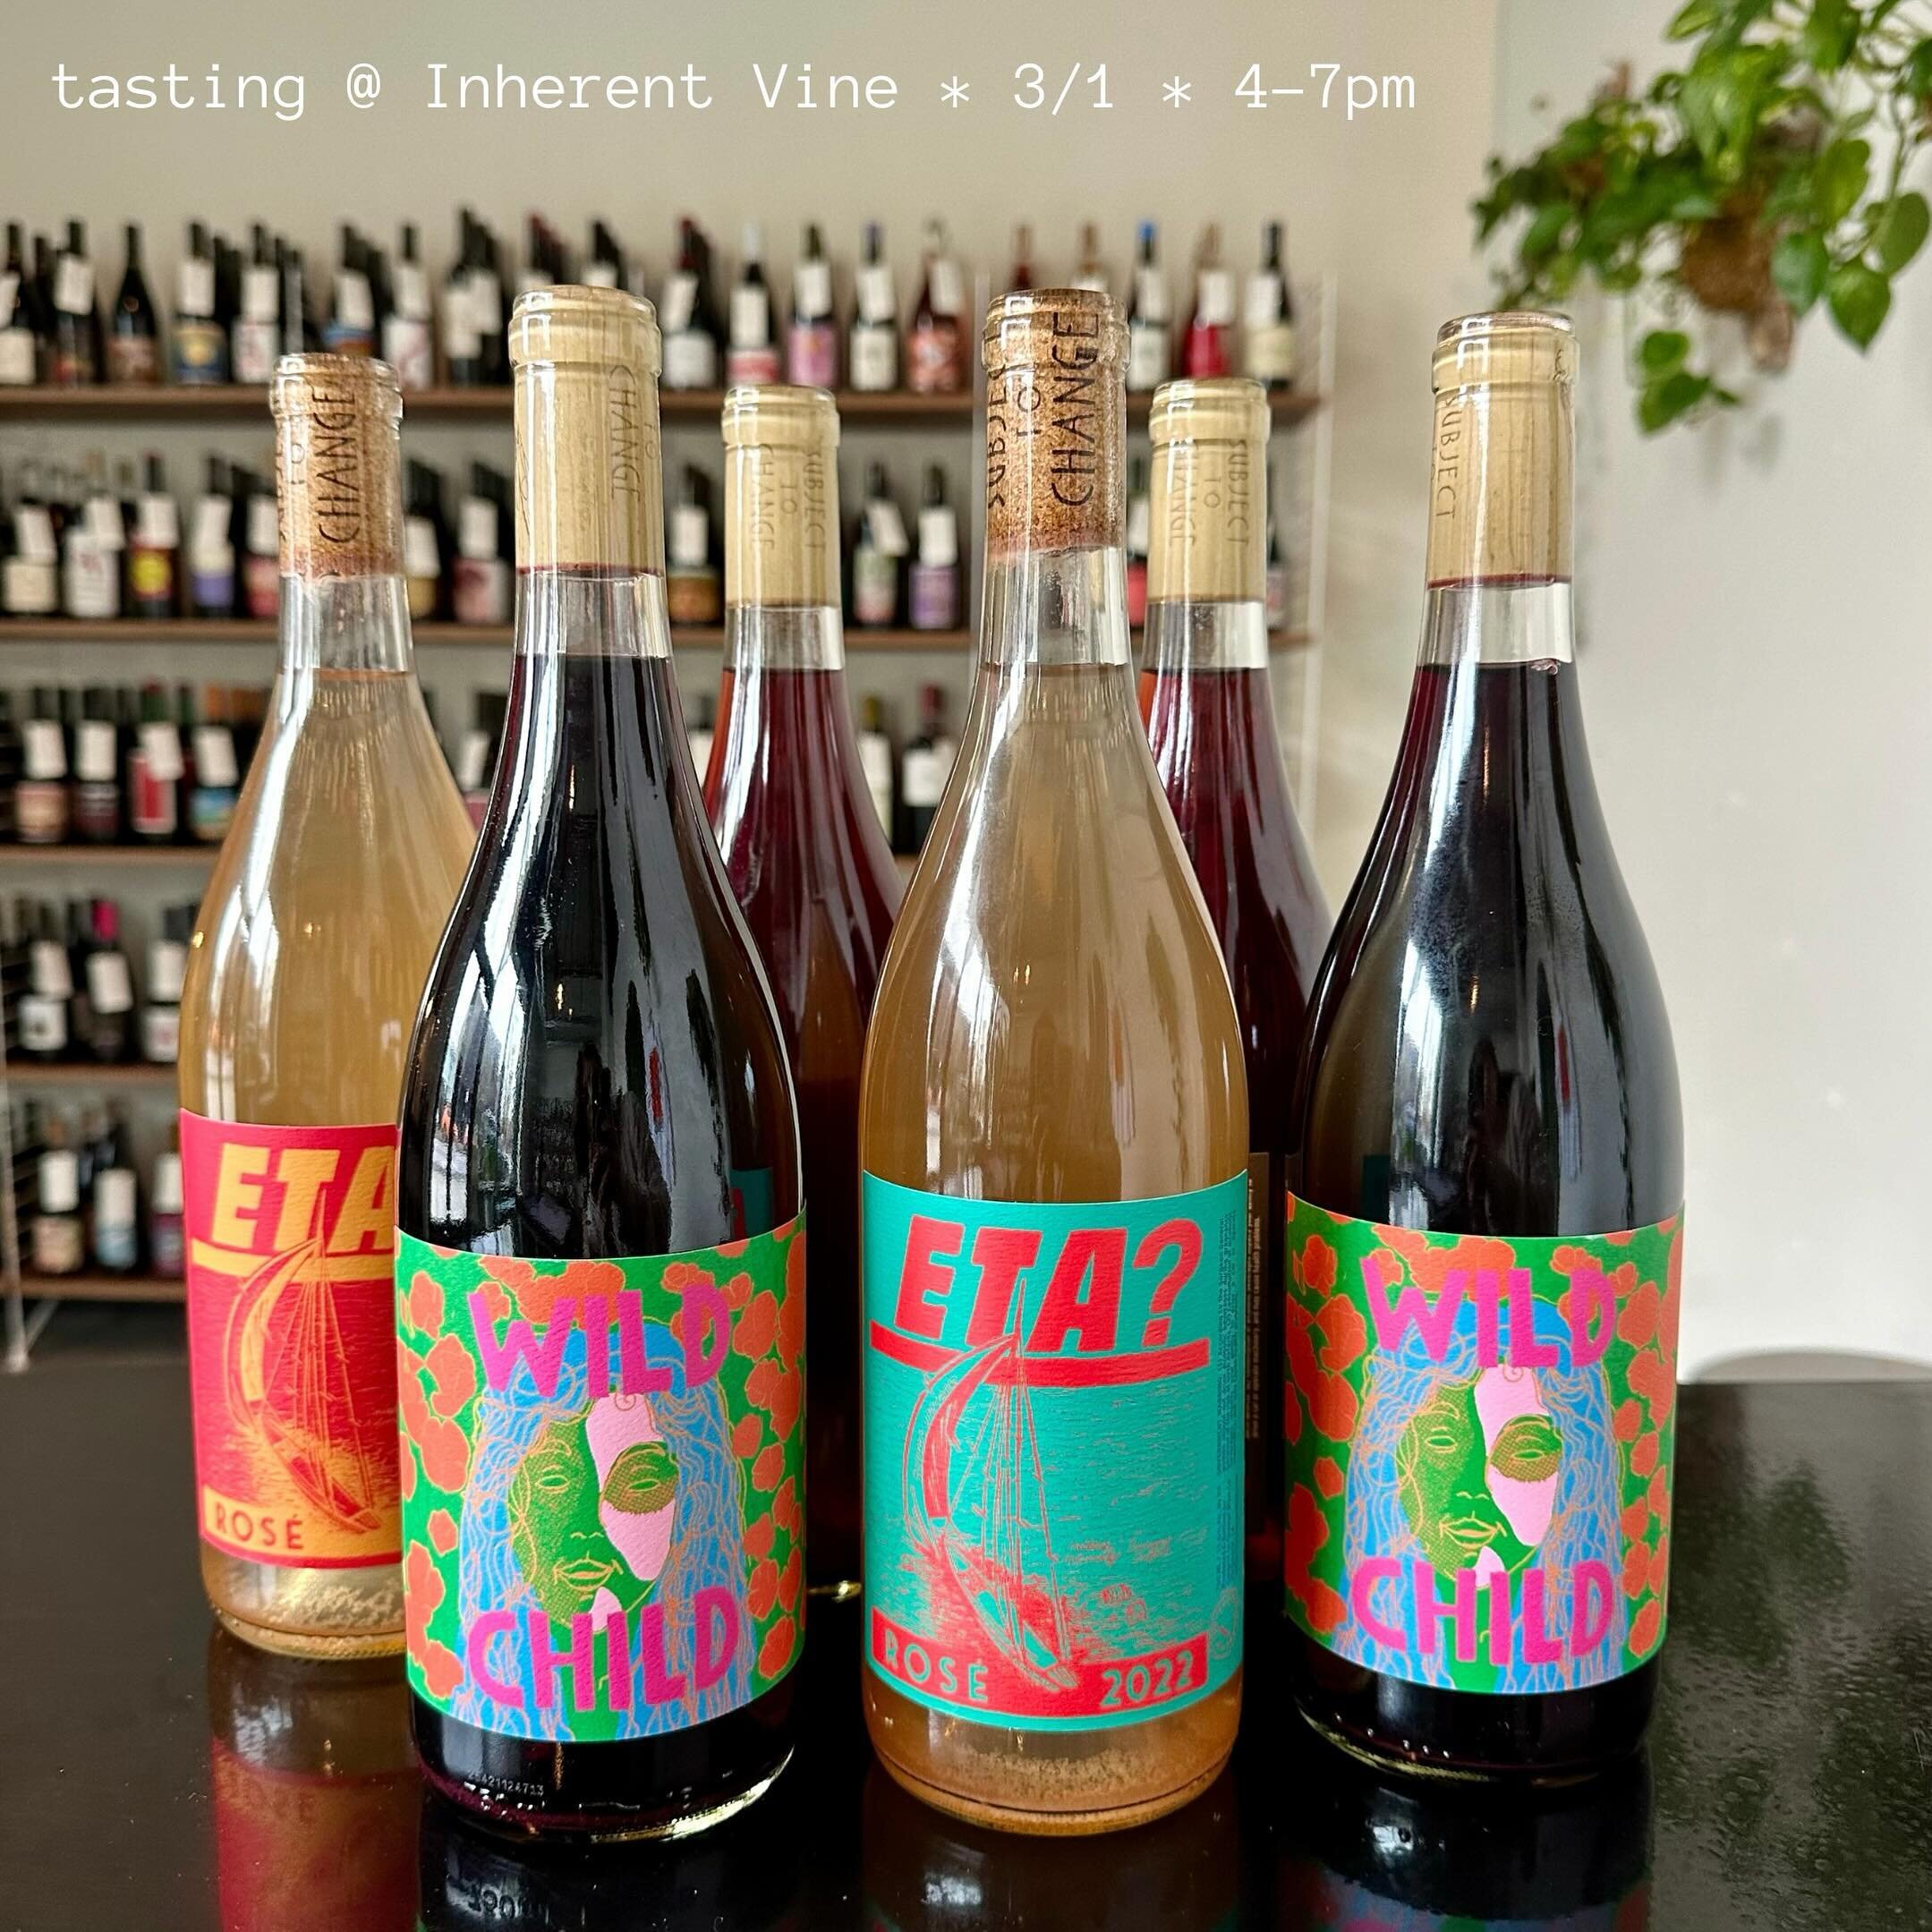 Meet the winemaker! Join us &amp; @subjecttochangewineco tomorrow 3/1 from 4-7pm to taste 4 of our favs. Tasting is free, bottles available for purchase 🤙